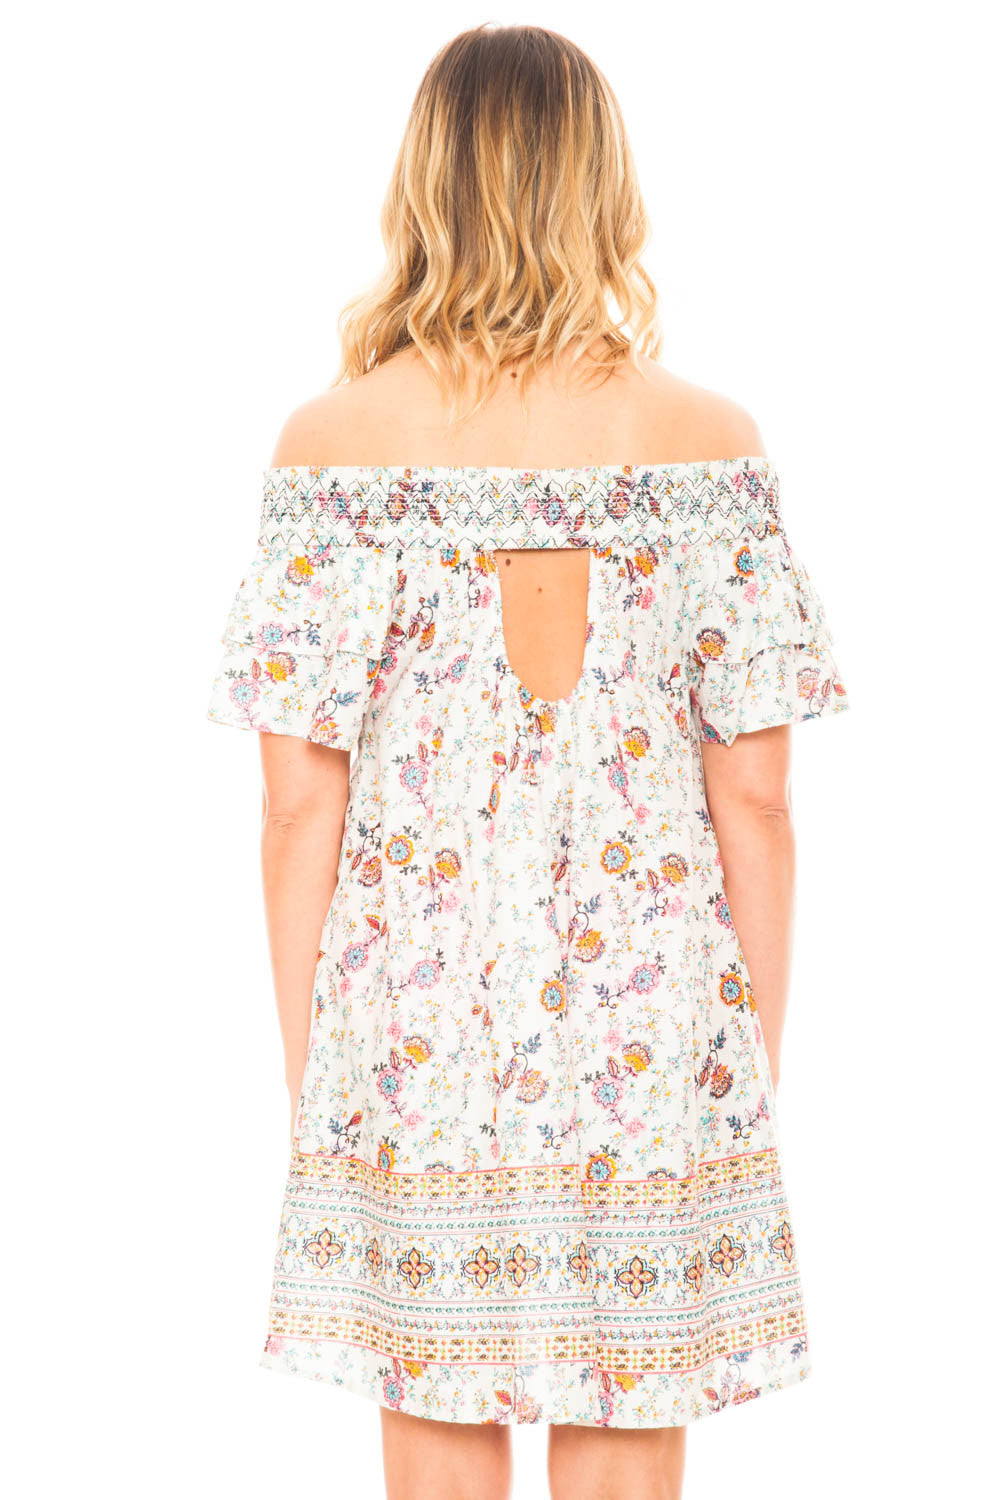 Dress - Off Shoulder Printed Dress with a Ruffled Sleeve by En Creme